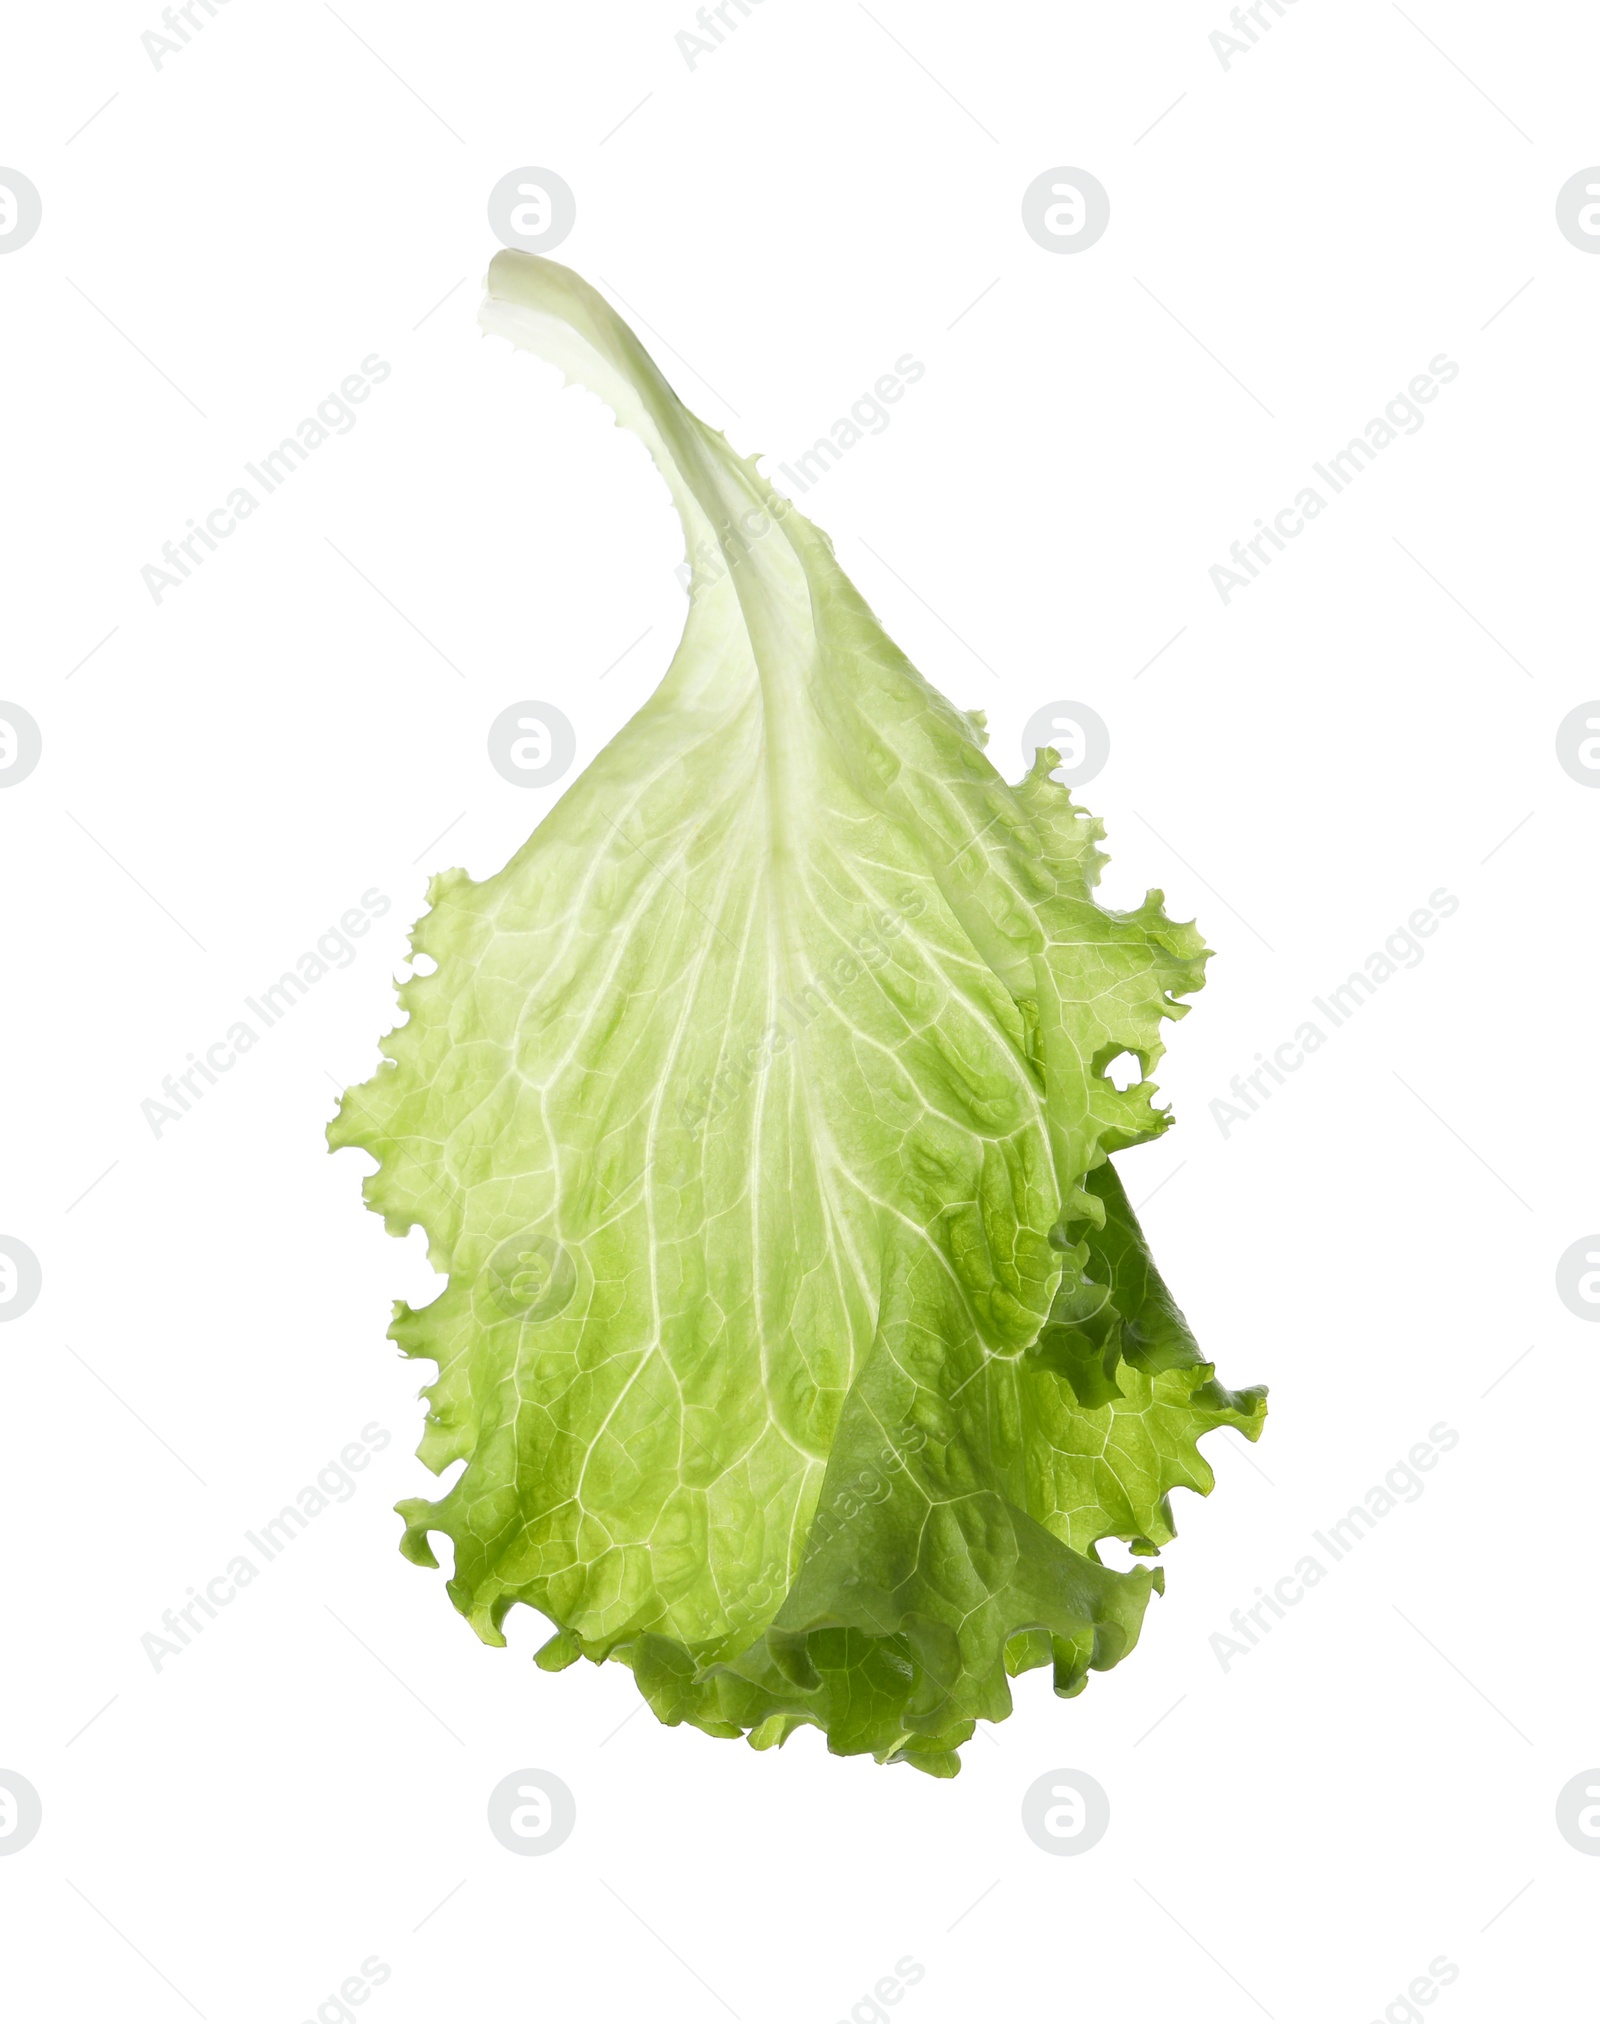 Photo of Leaf of fresh green lettuce isolated on white